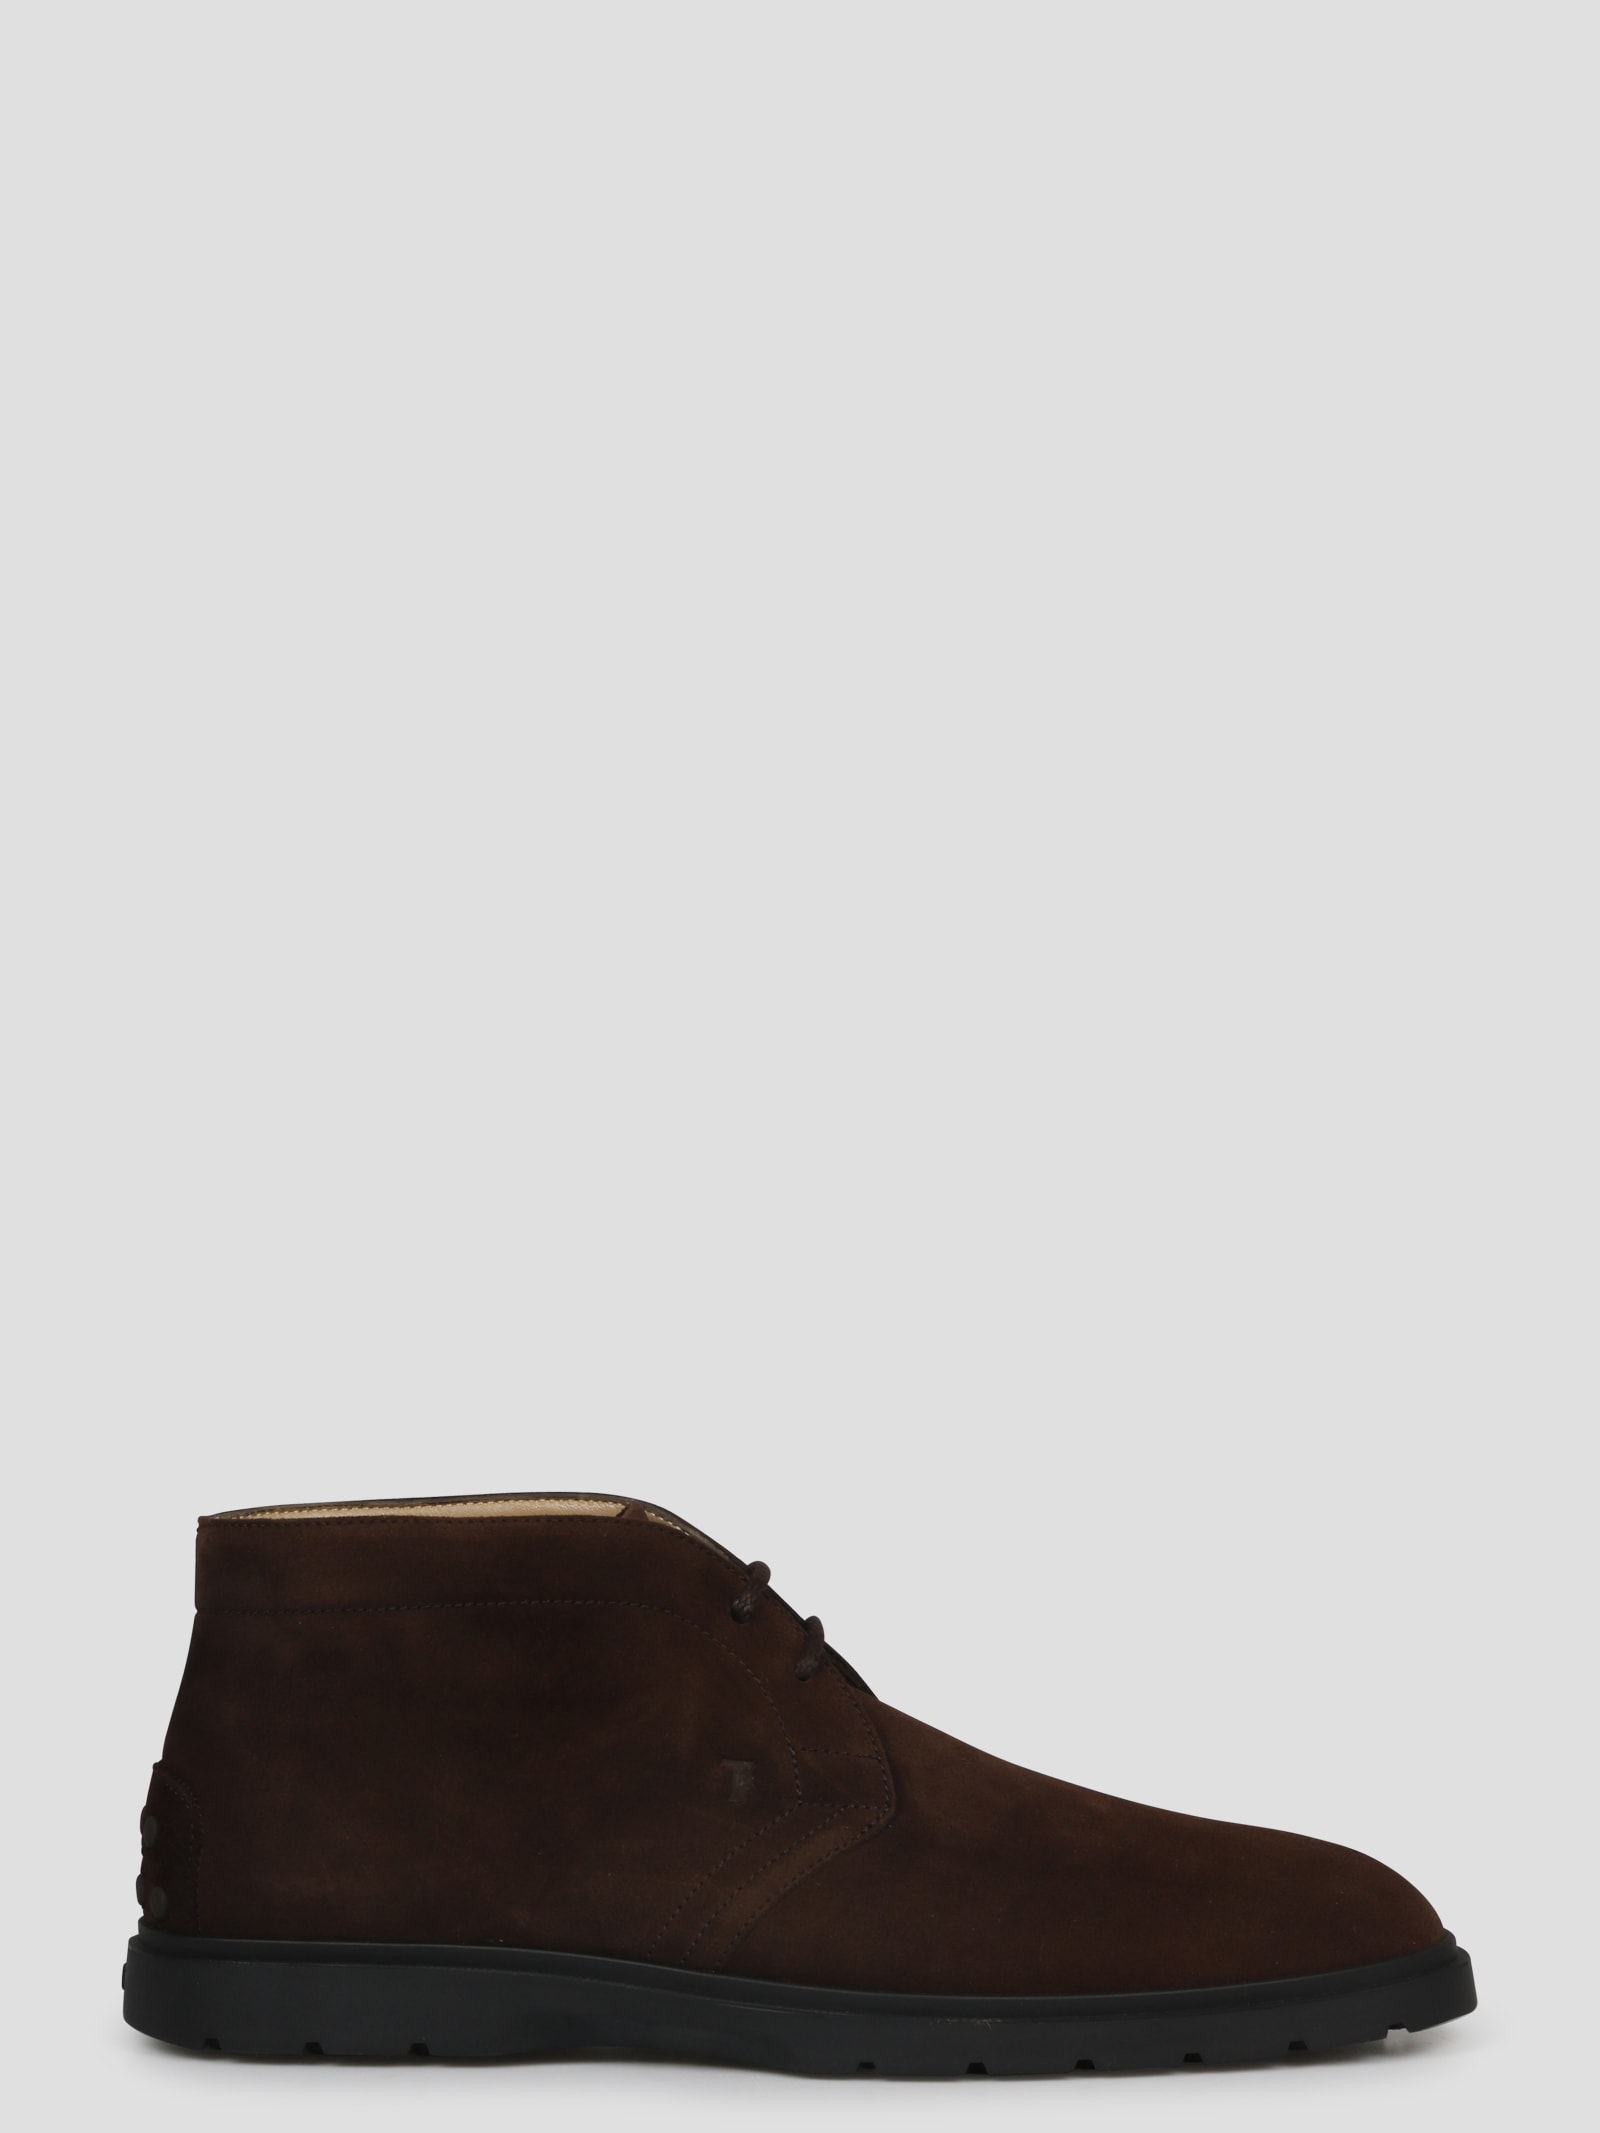 TOD'S SUEDE DESERT BOOTS